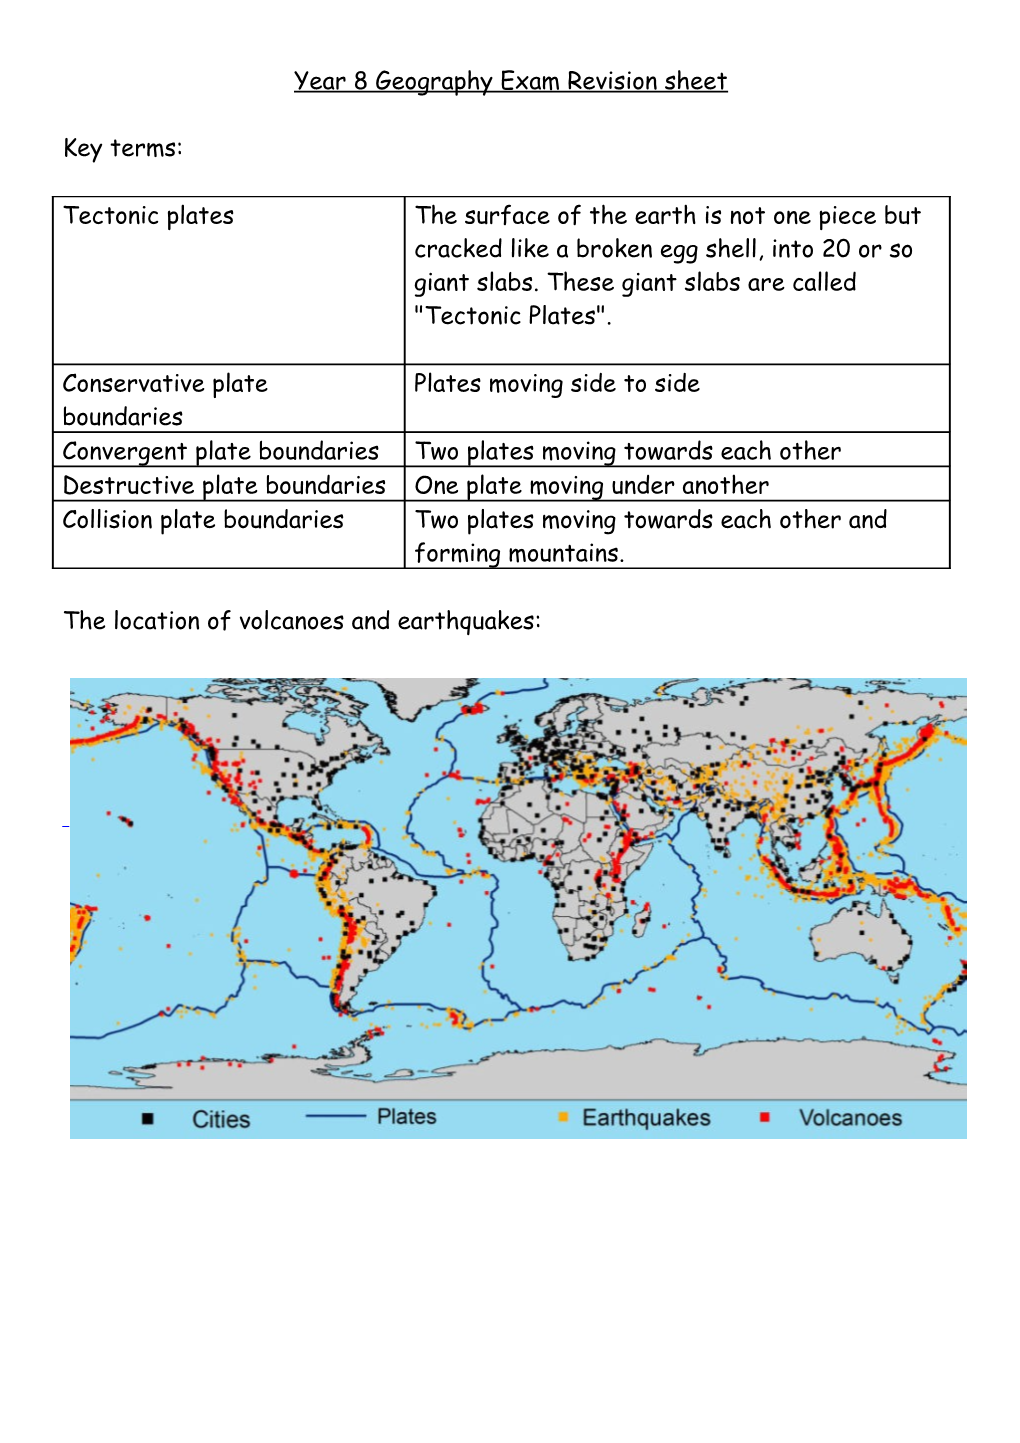 Year 8 Geography Exam Revision Sheet